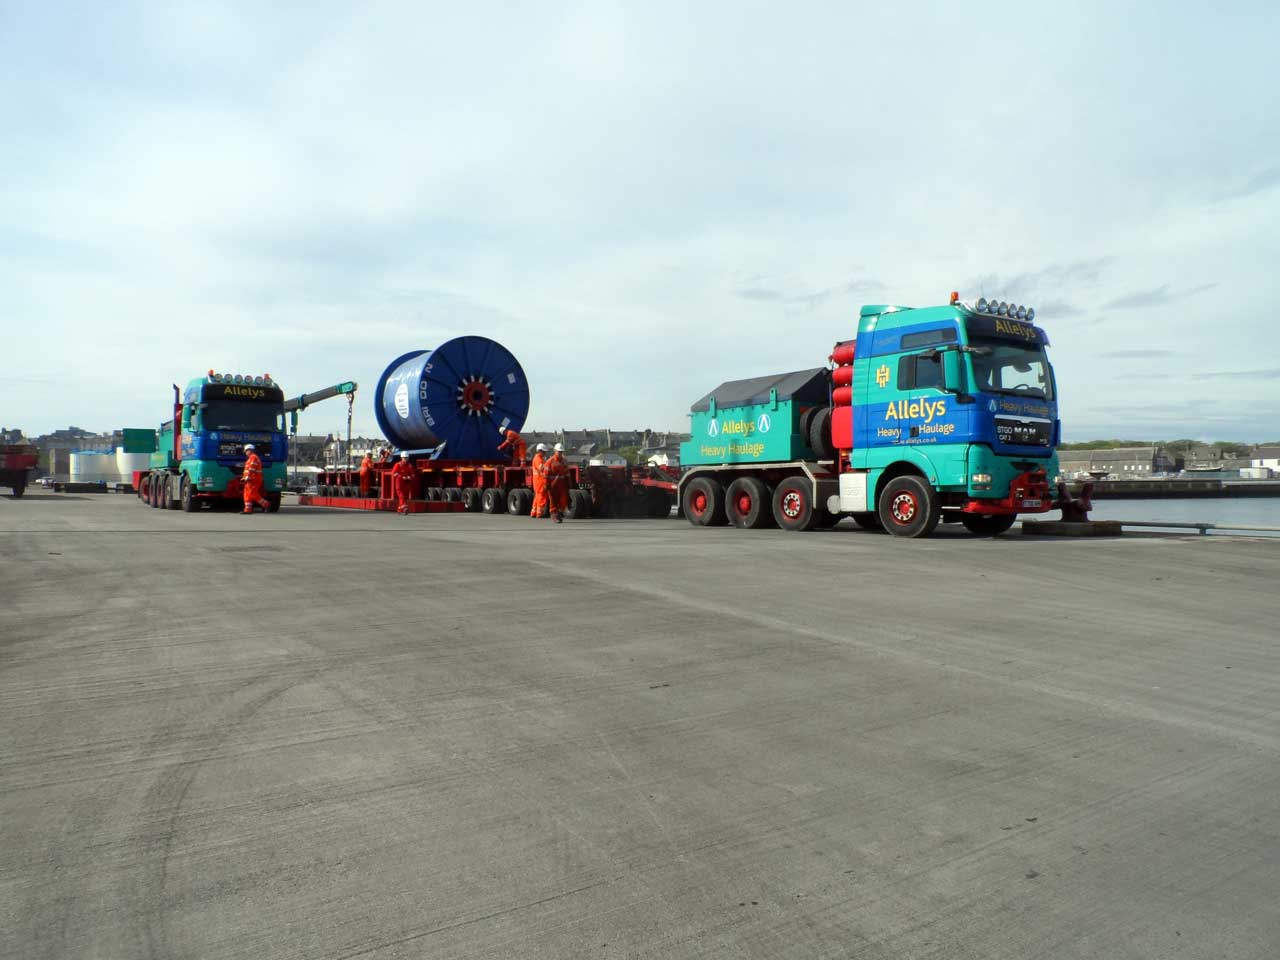 Photo: 170 Tonne Cable At Wick Bound For Subsea7 At Wester